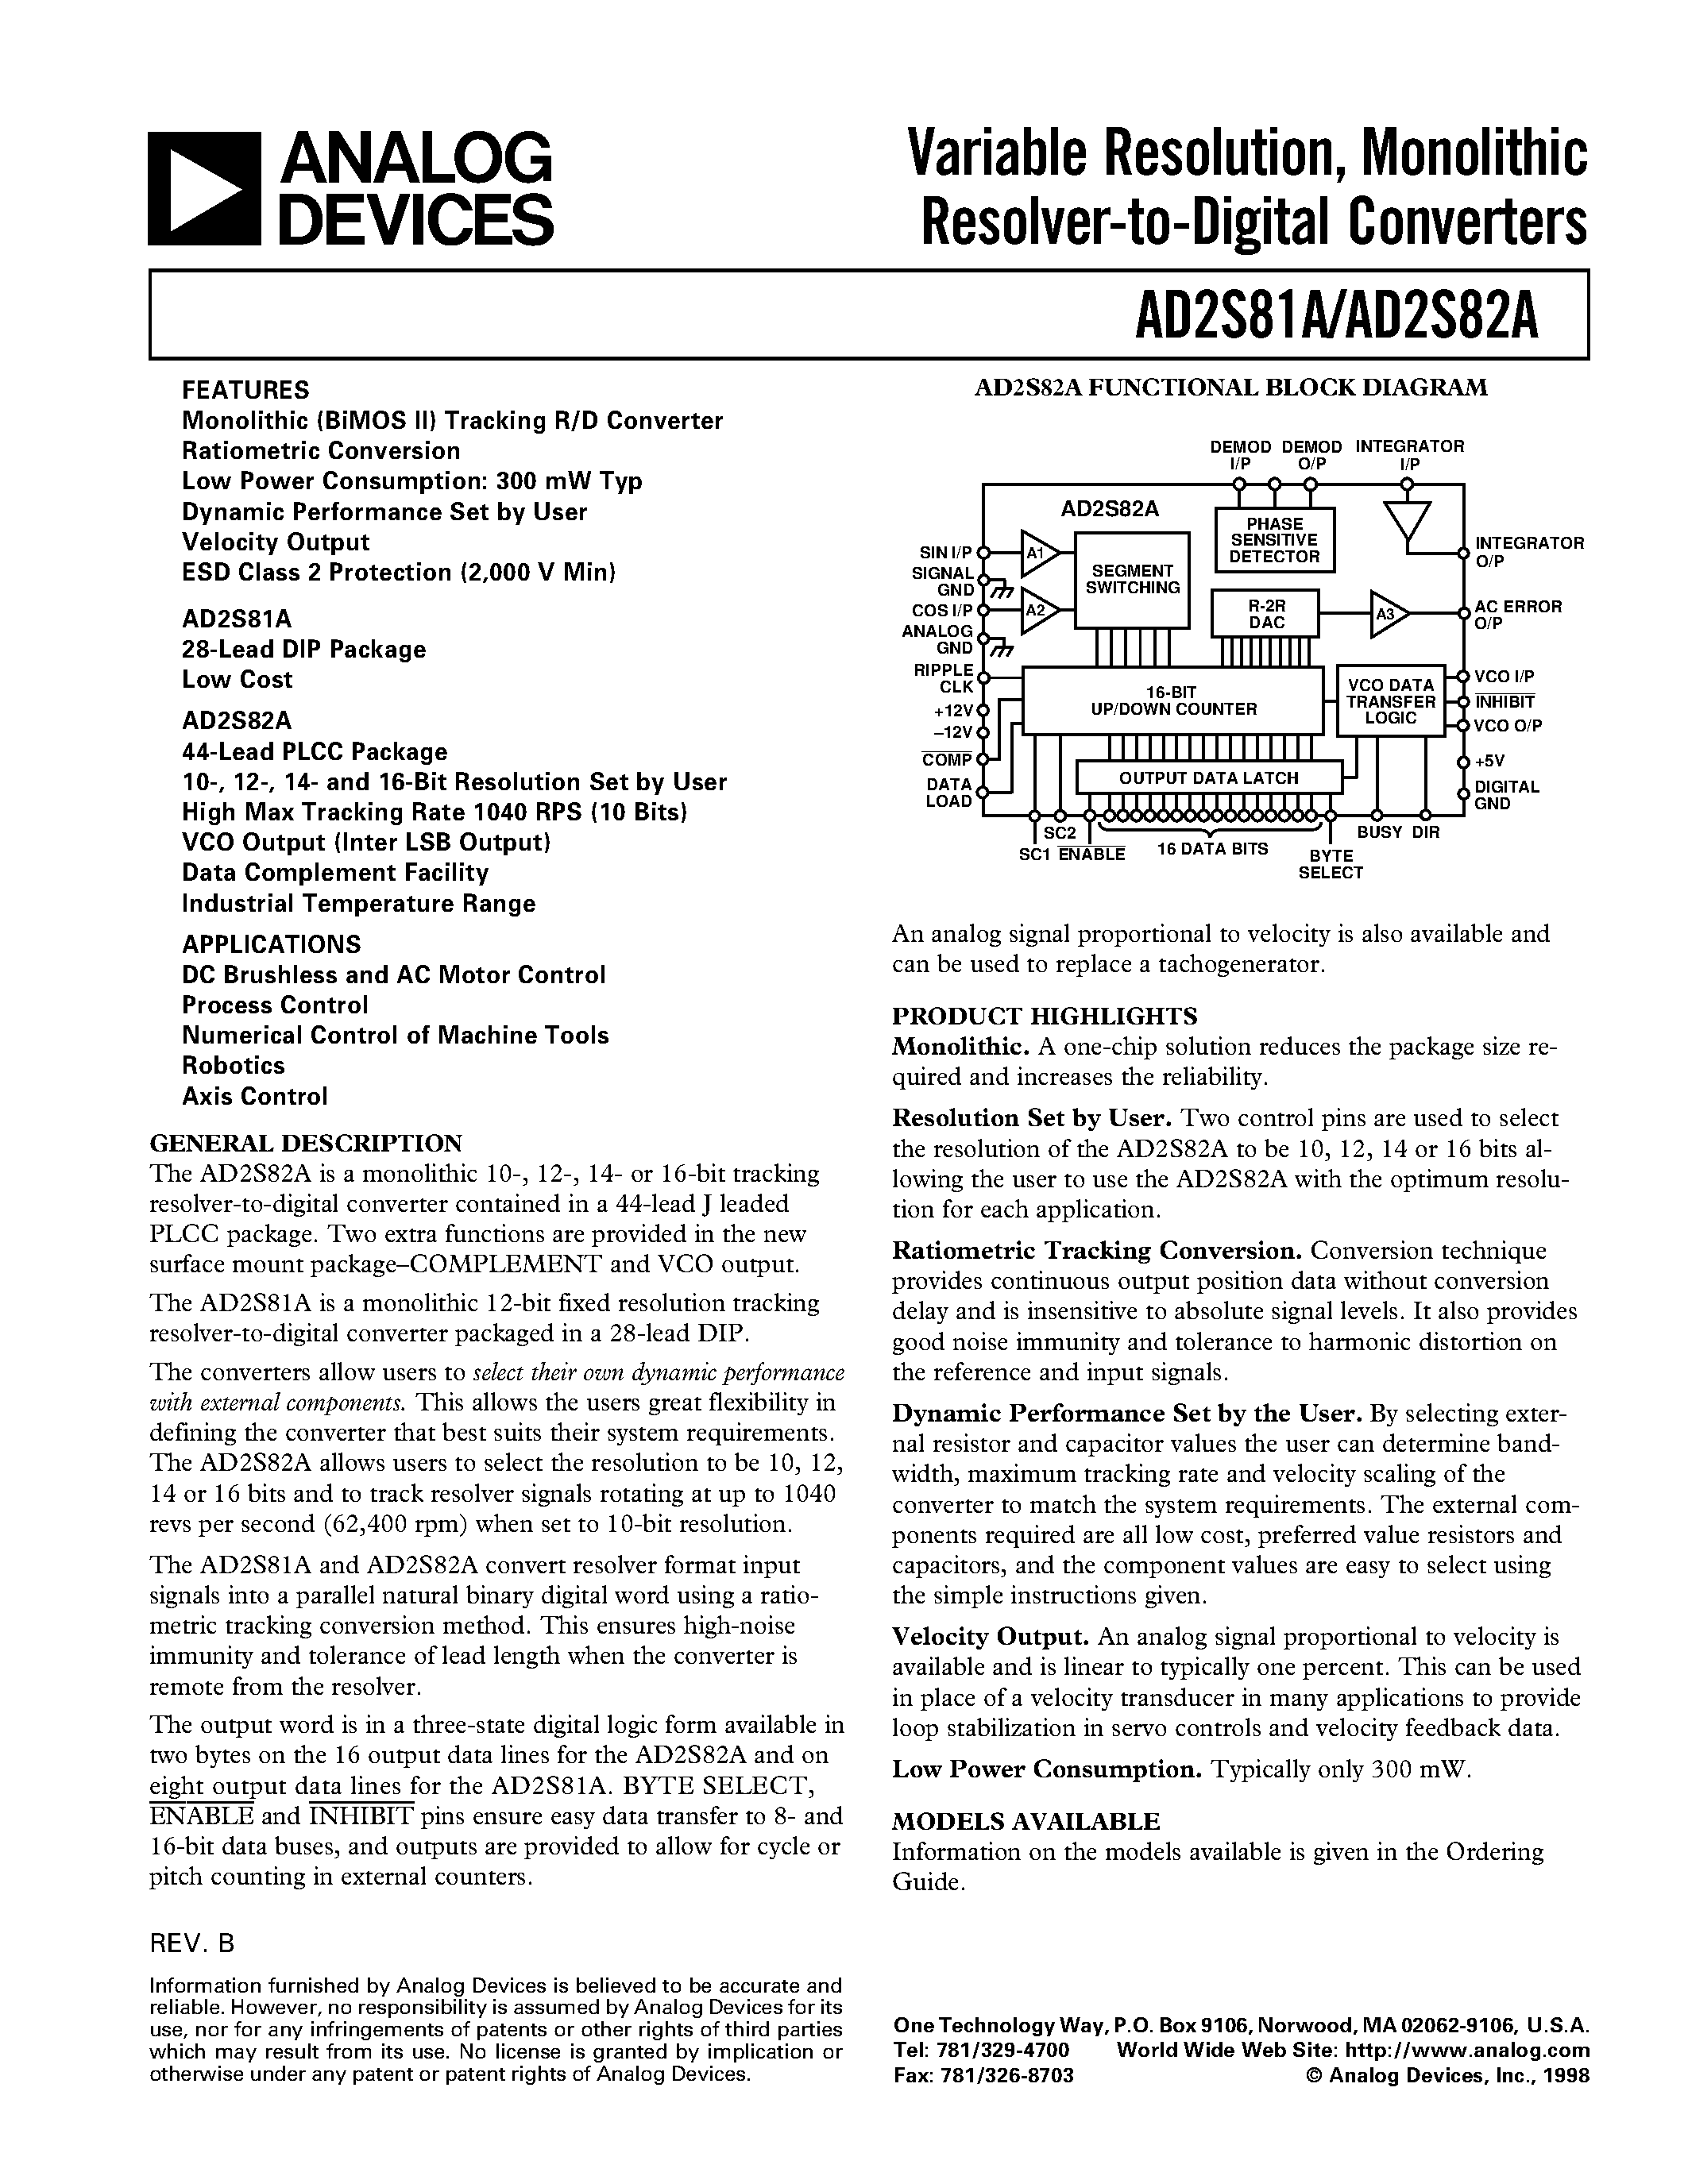 Даташит AD2S82AHP - Variable Resolution/ Monolithic Resolver-to-Digital Converters страница 1